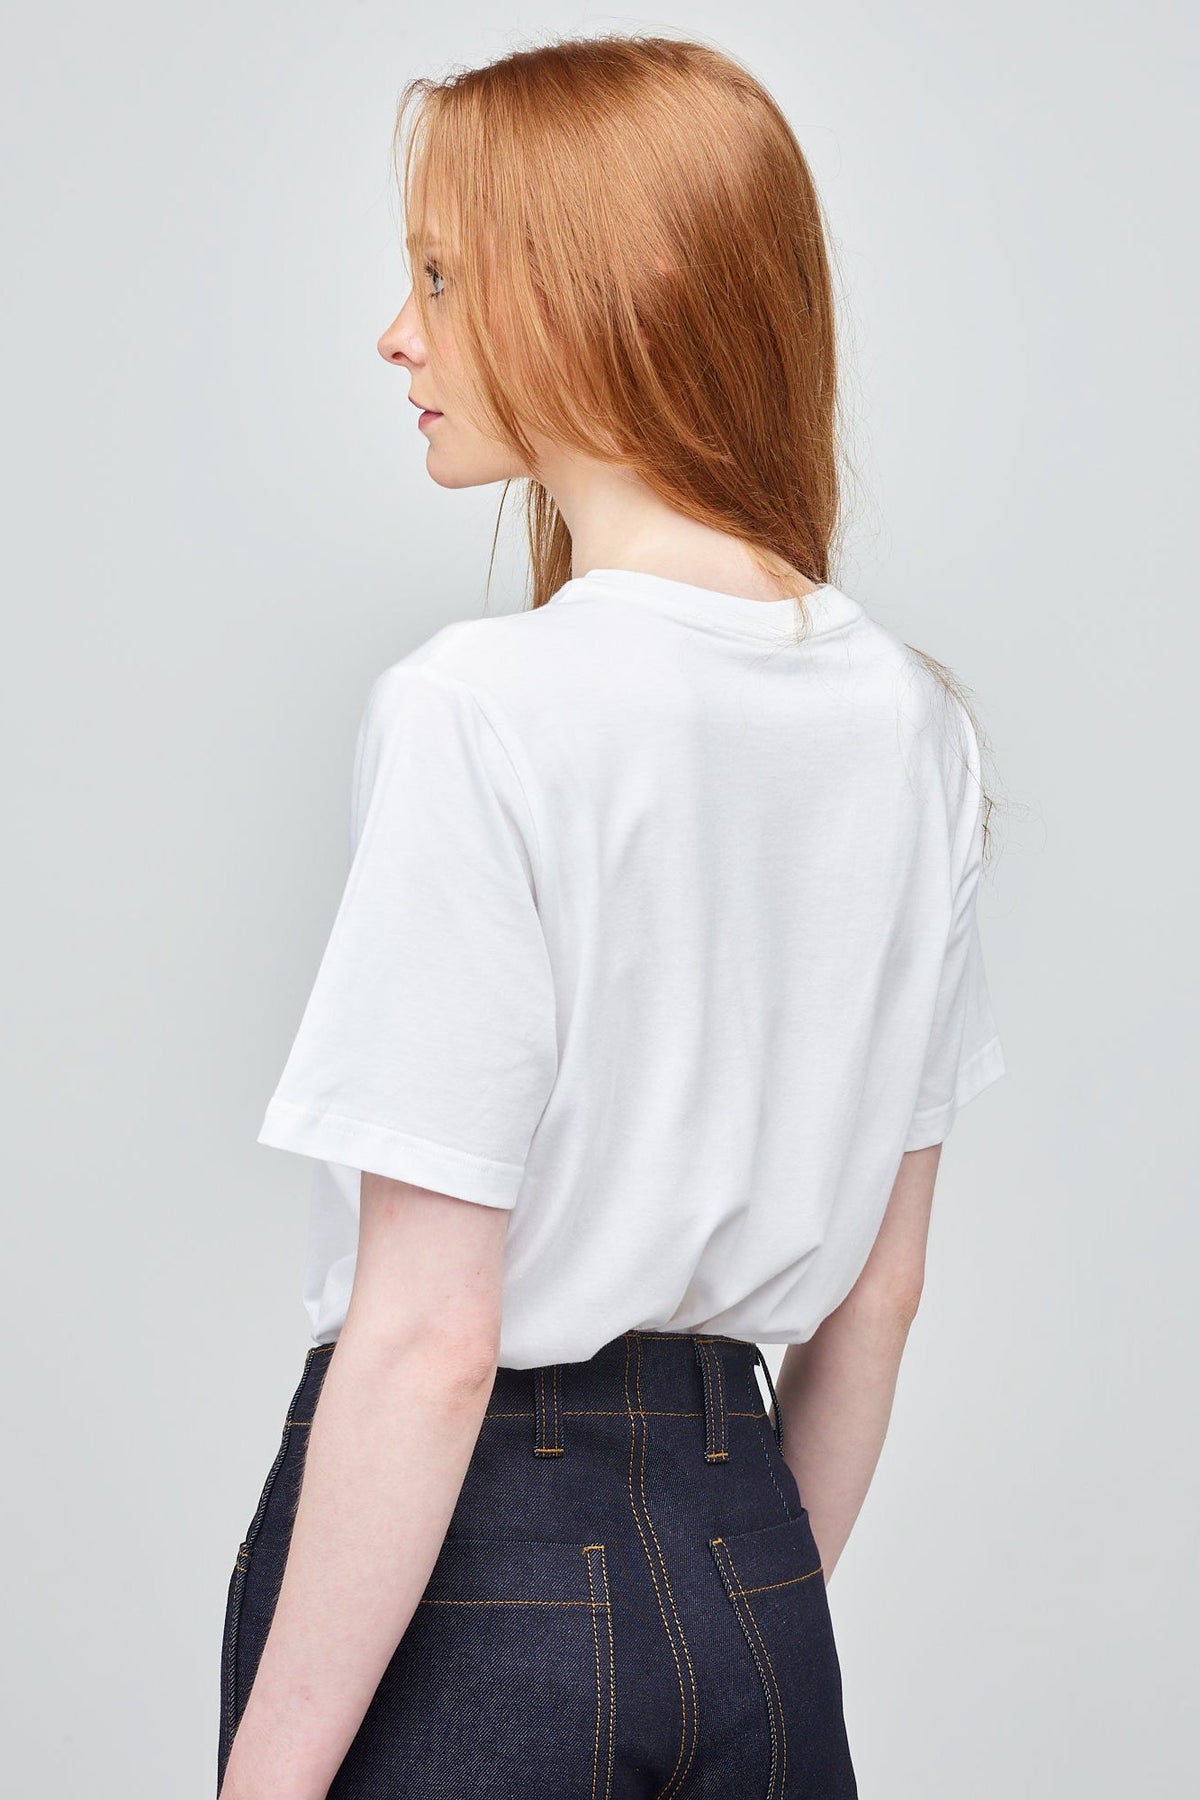 
            A young, white model with long ginger hair wearing a short sleeve white t-shirt